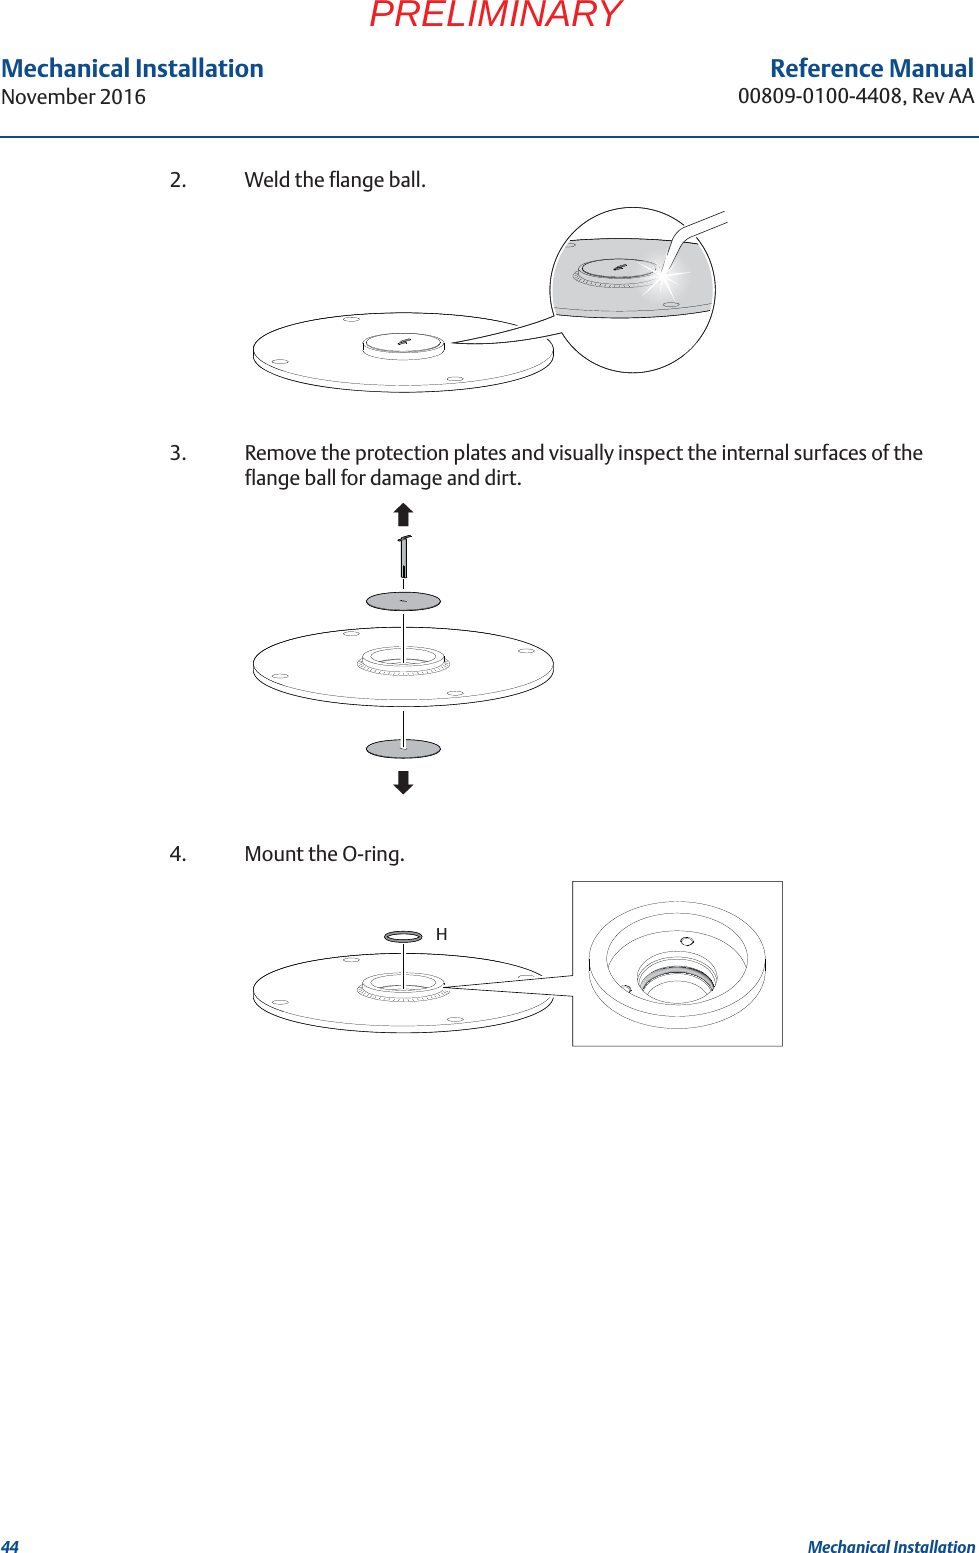 44Reference Manual00809-0100-4408, Rev AAMechanical InstallationNovember 2016Mechanical InstallationPRELIMINARY2. Weld the flange ball.3. Remove the protection plates and visually inspect the internal surfaces of the flange ball for damage and dirt.4. Mount the O-ring.H